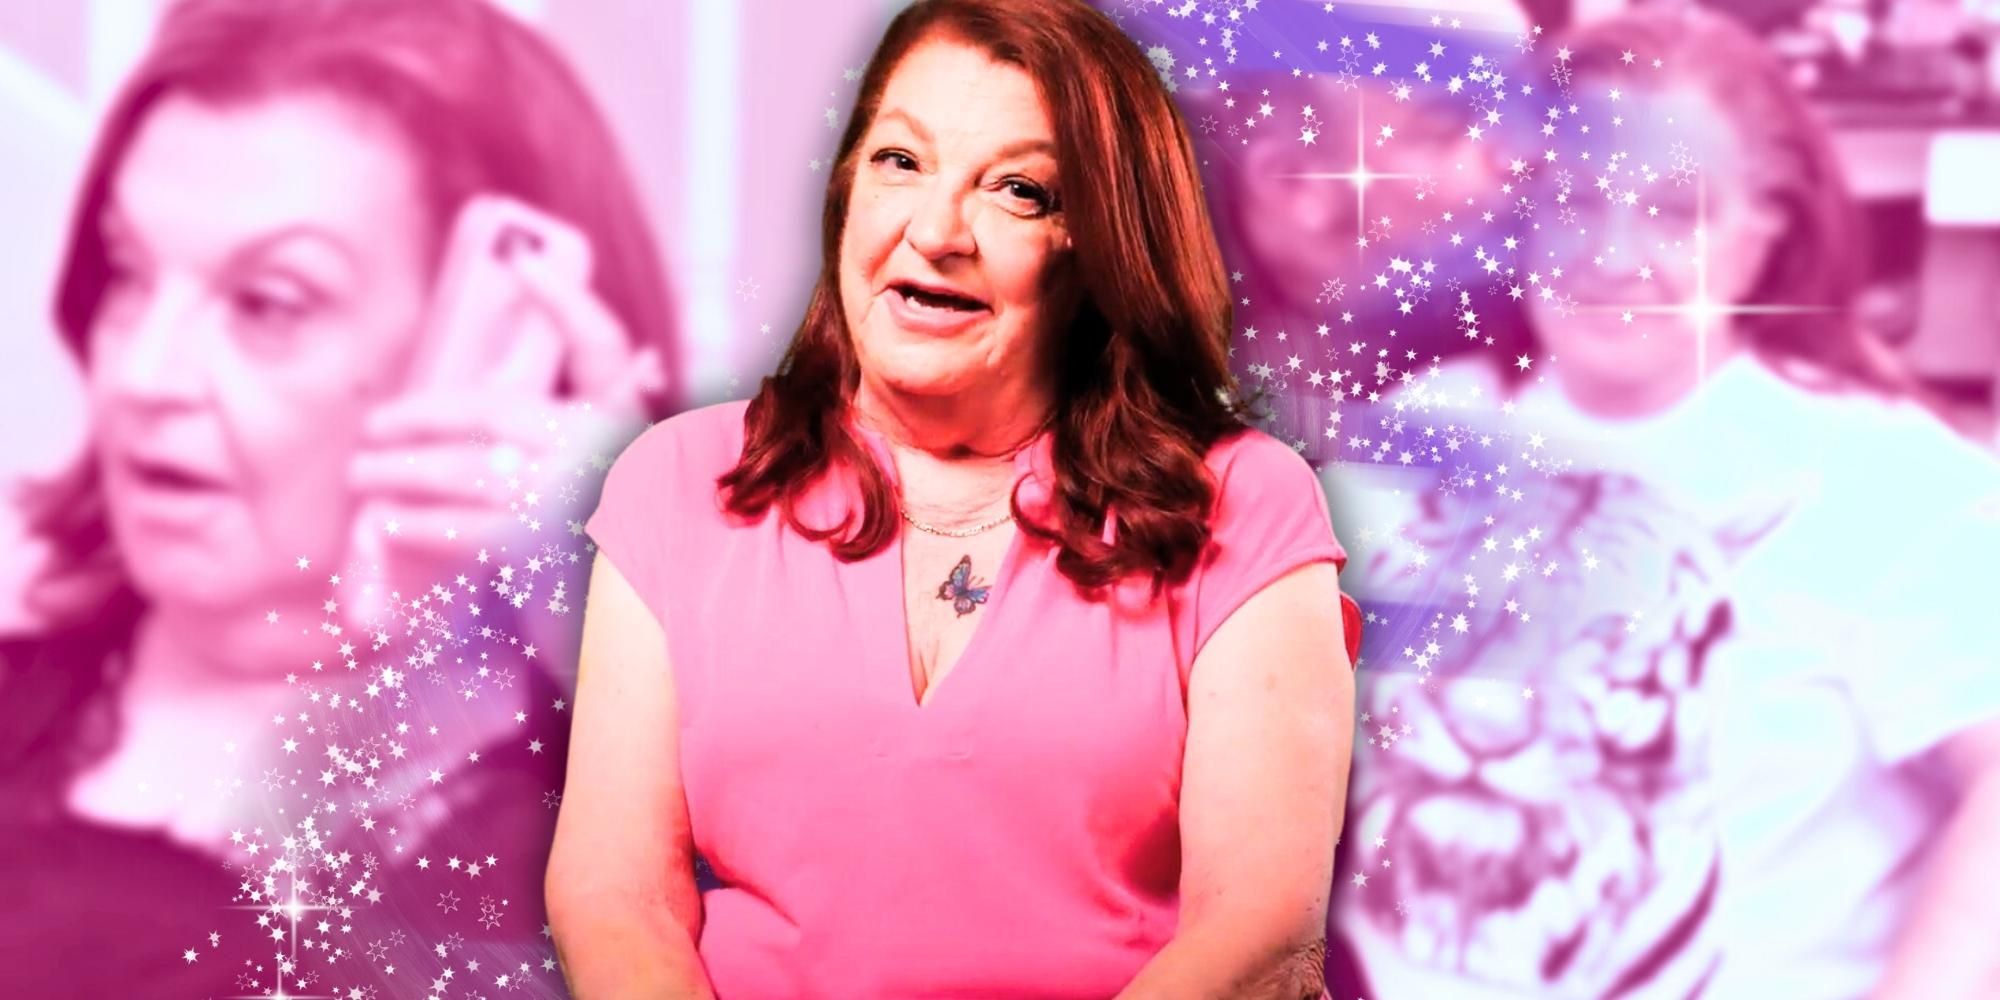 Montage of 90 Day Fiancé Star Debbie Johnson with pink background